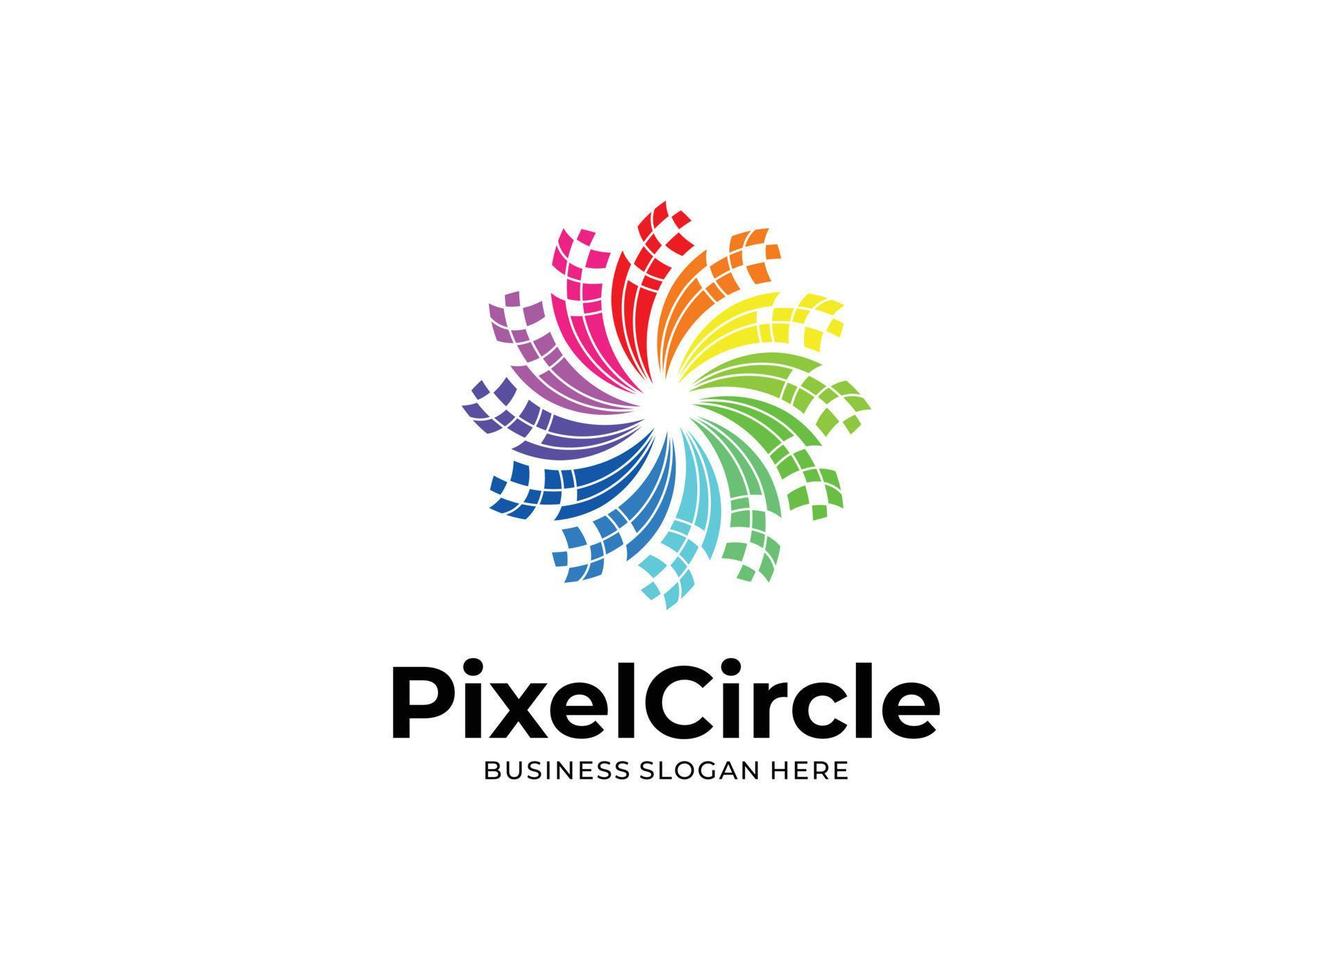 Illustration vector graphic of pixel circle technology logo designs concept. Perfect for technology, network, company, creative, teamwork, social, team, and community